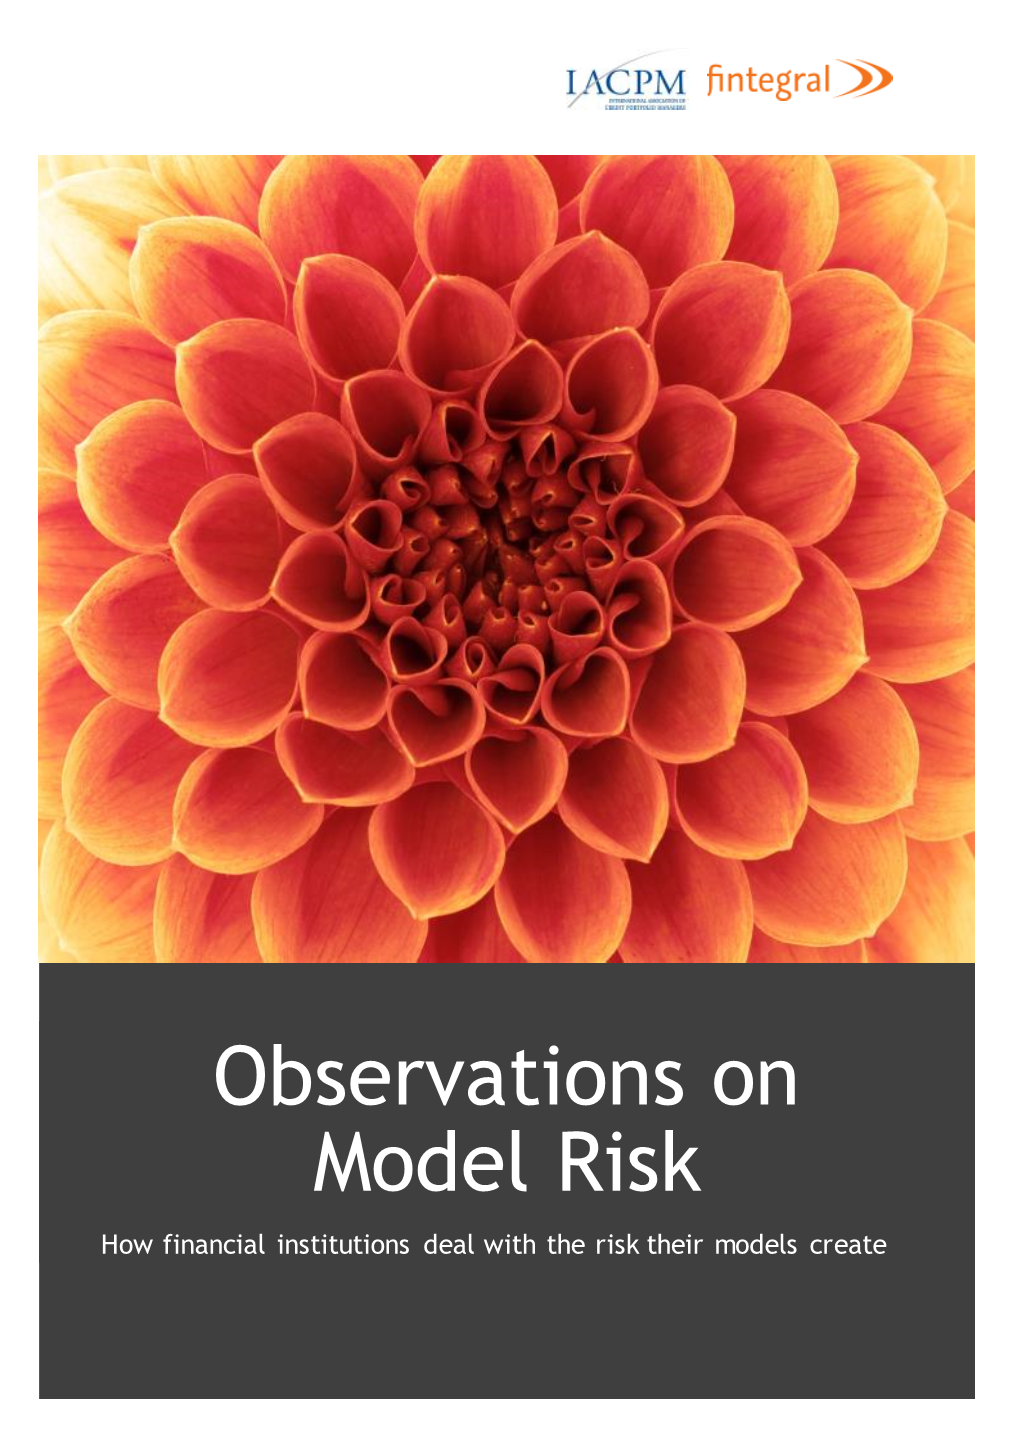 Model Risk How Financial Institutions Deal with the Risk Their Models Create